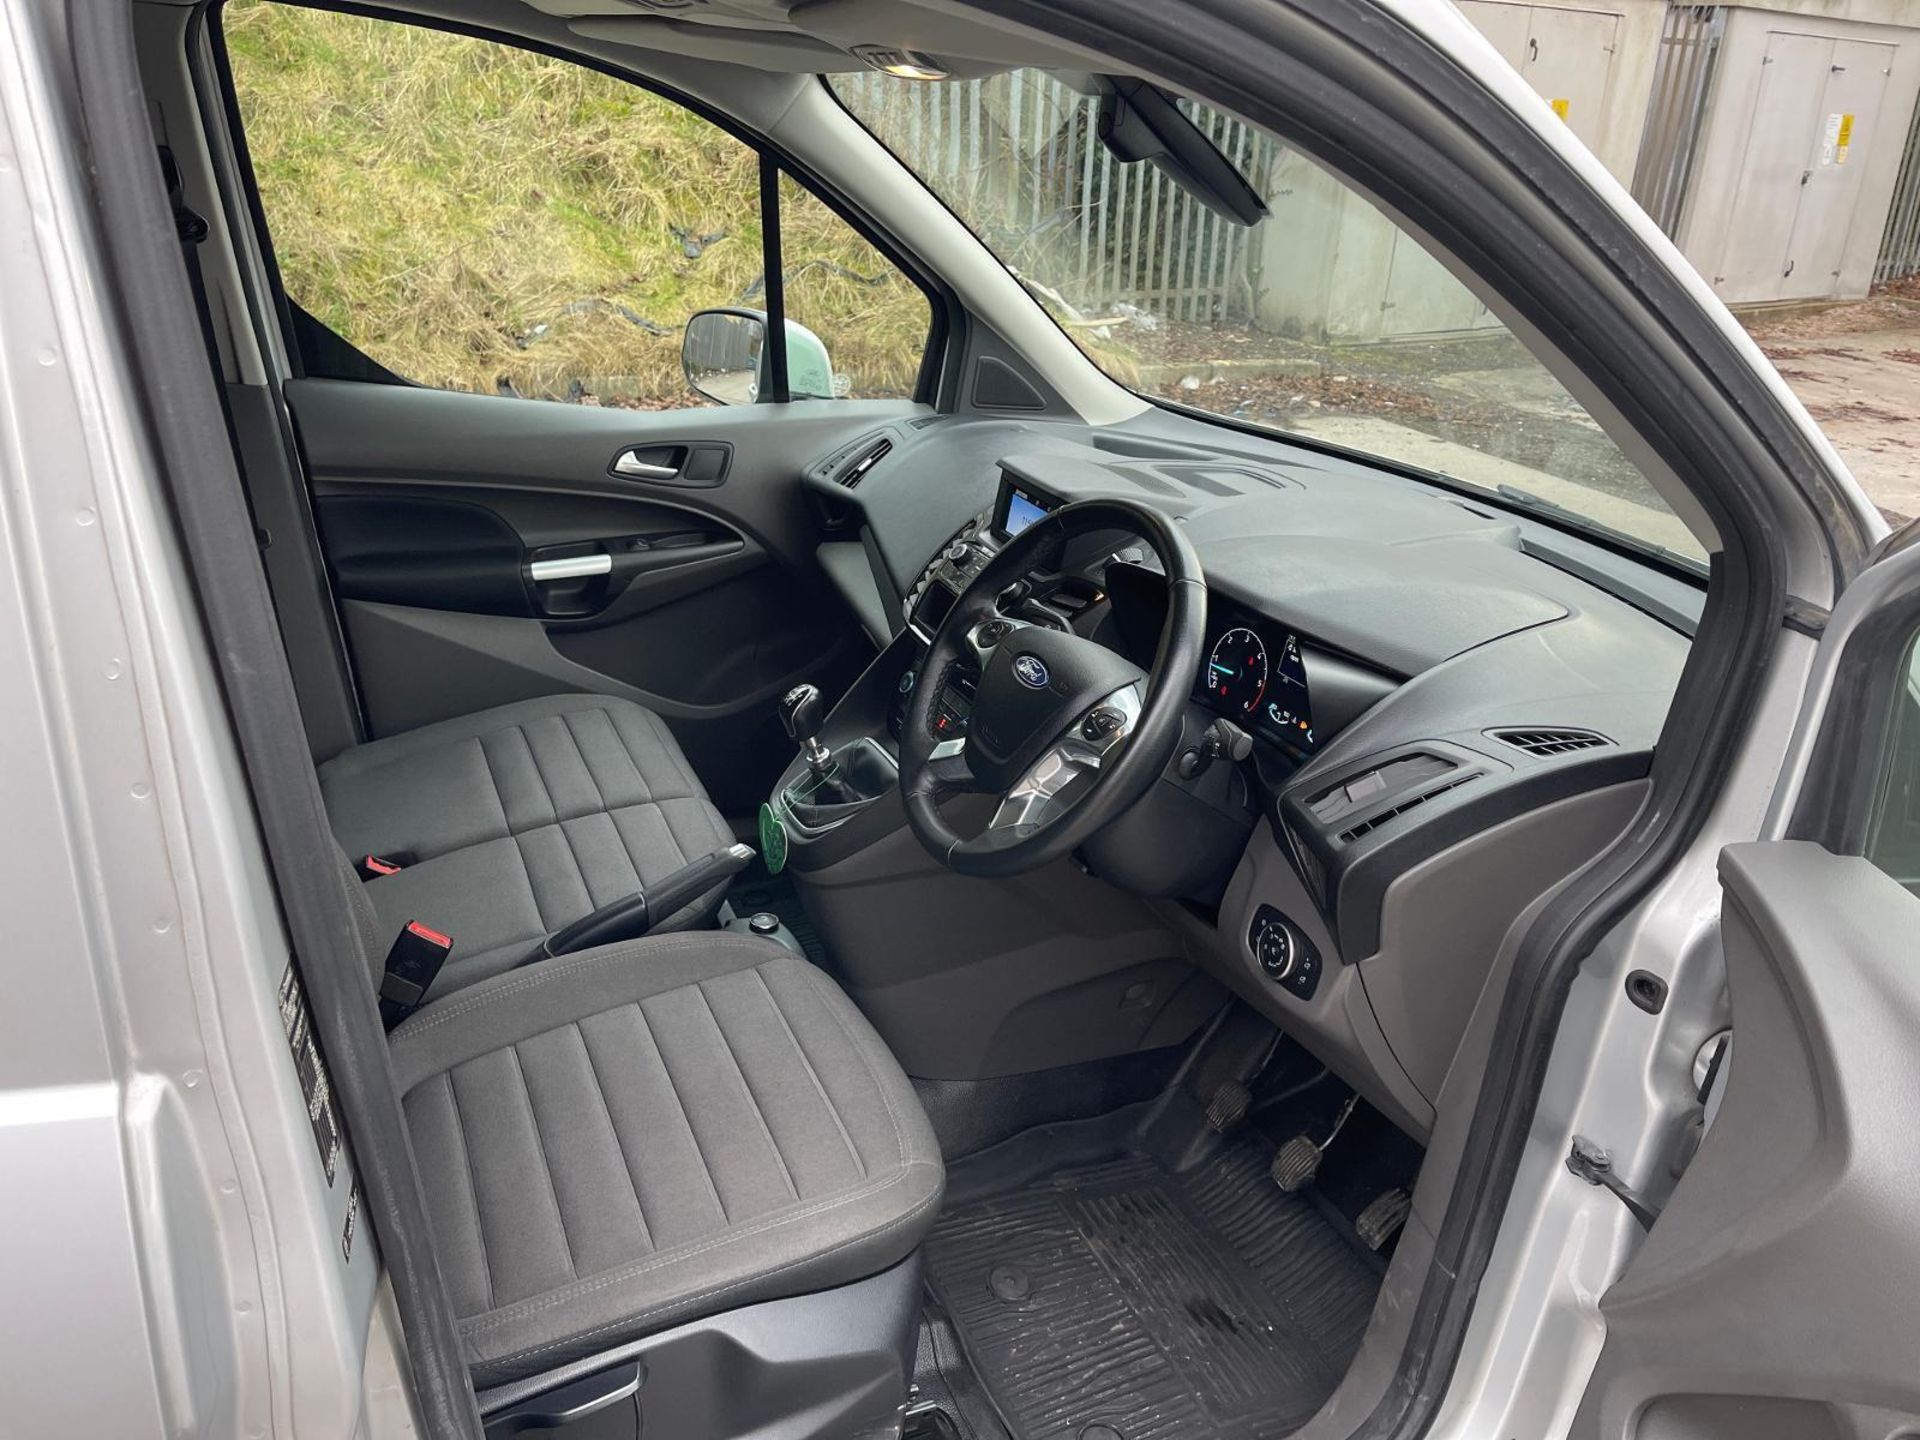 2019 FORD TRANSIT CONNECT LIMITED: POWERFUL 1.5 TDCI DIESEL - Image 11 of 12